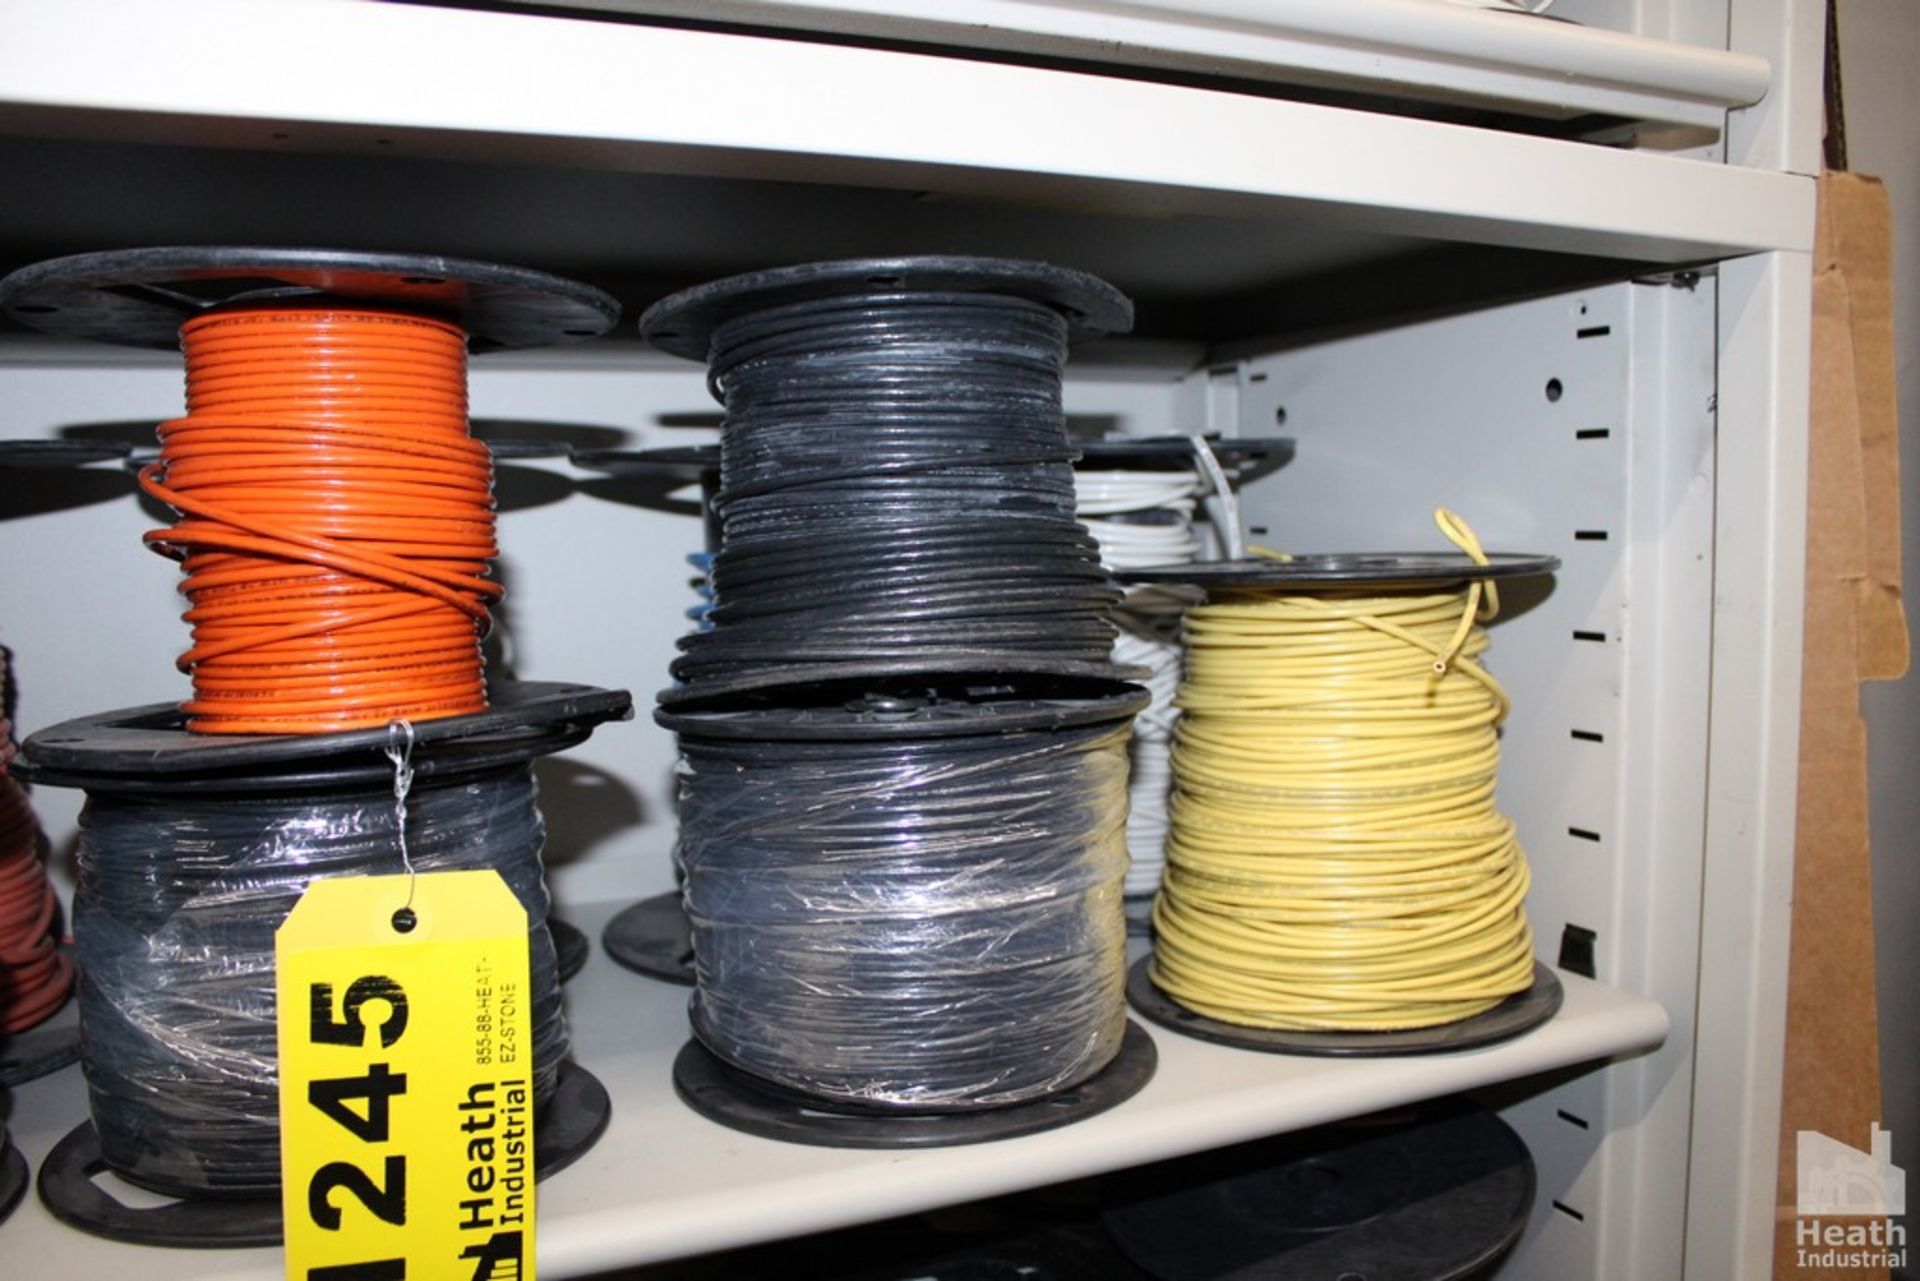 (15) ASSORTED SPOOLS OF WIRE ON SHELF - Image 3 of 3